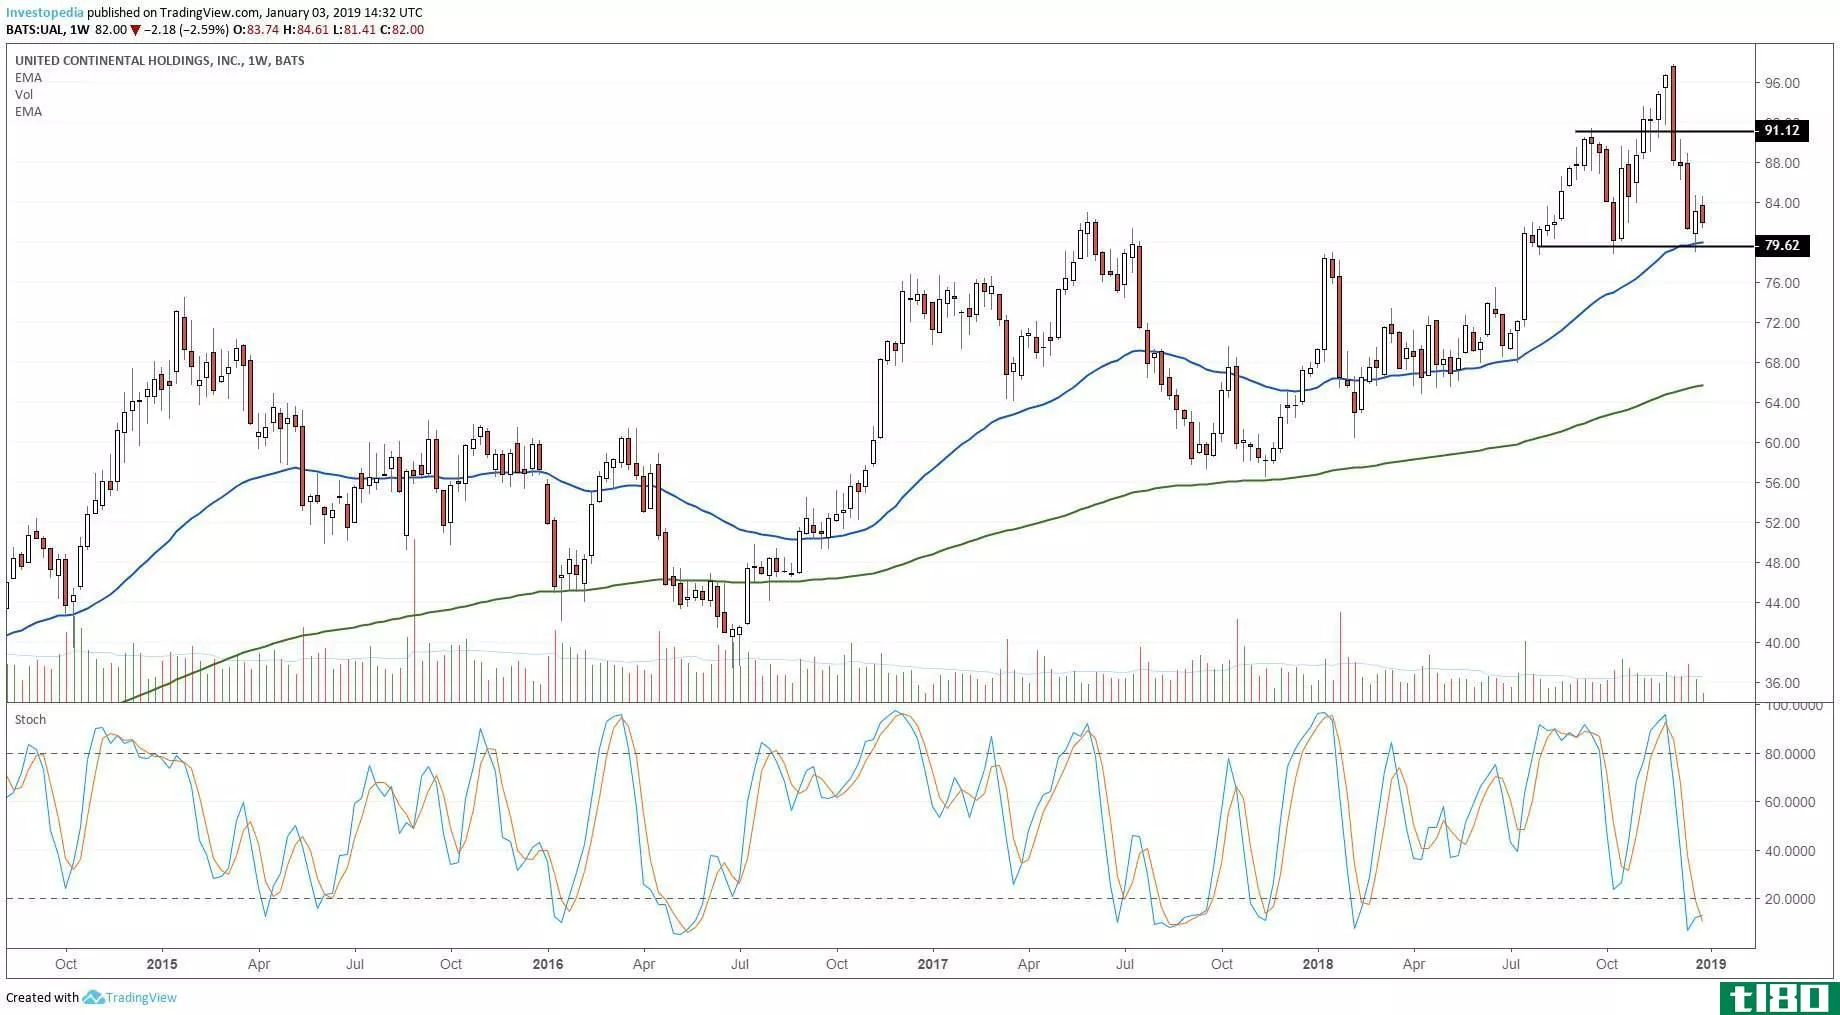 Technical chart showing the share price performance of United Continental Holdings, Inc. (UAL)